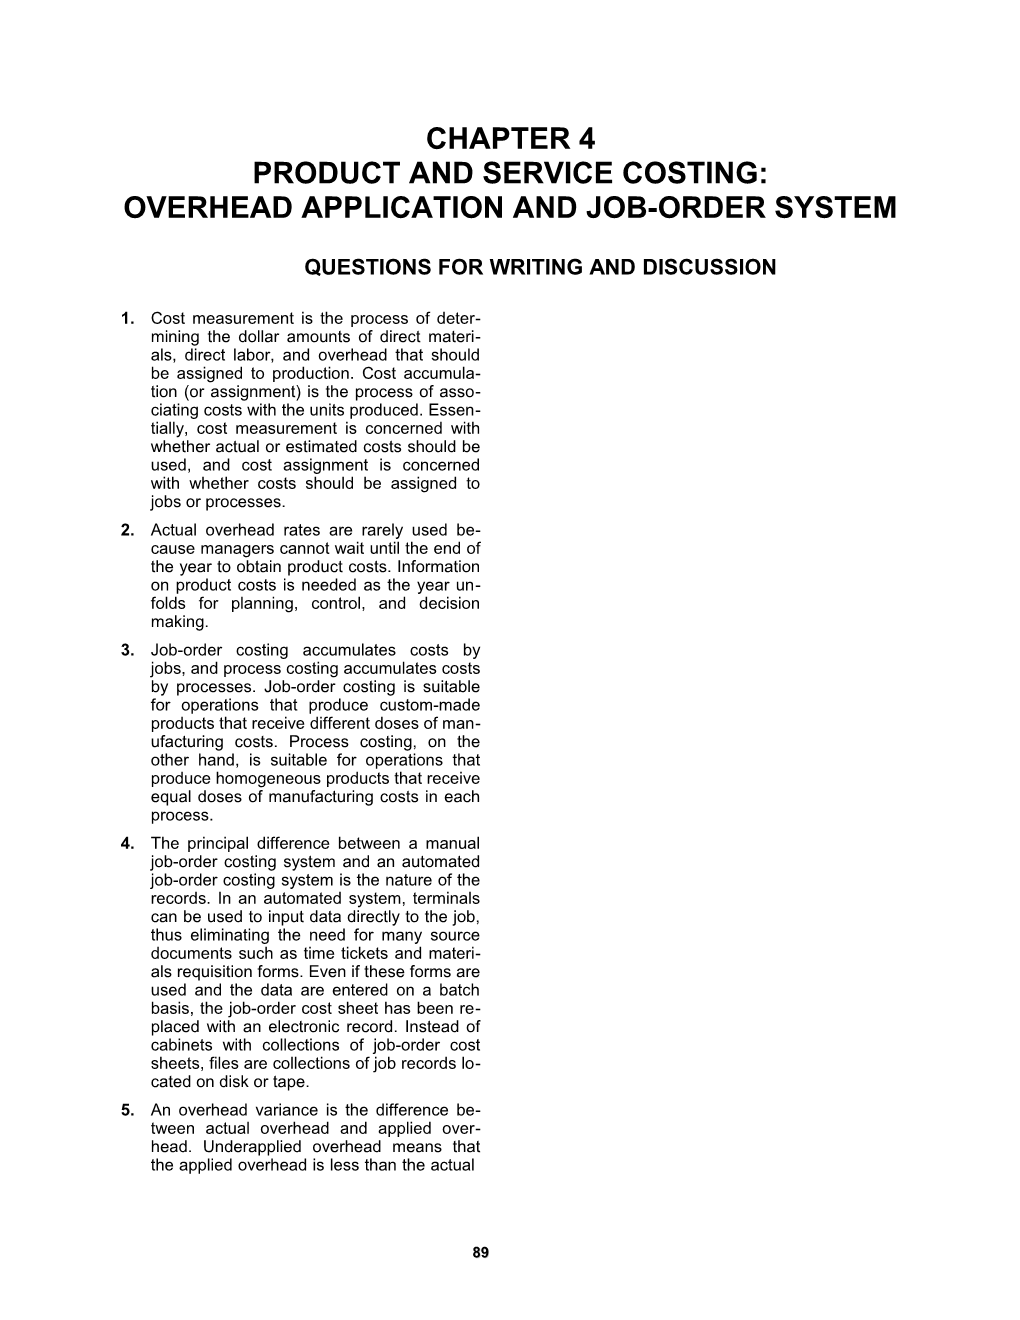 Chapter 4: Product and Service Costing: Overhead Application and Job-Order System